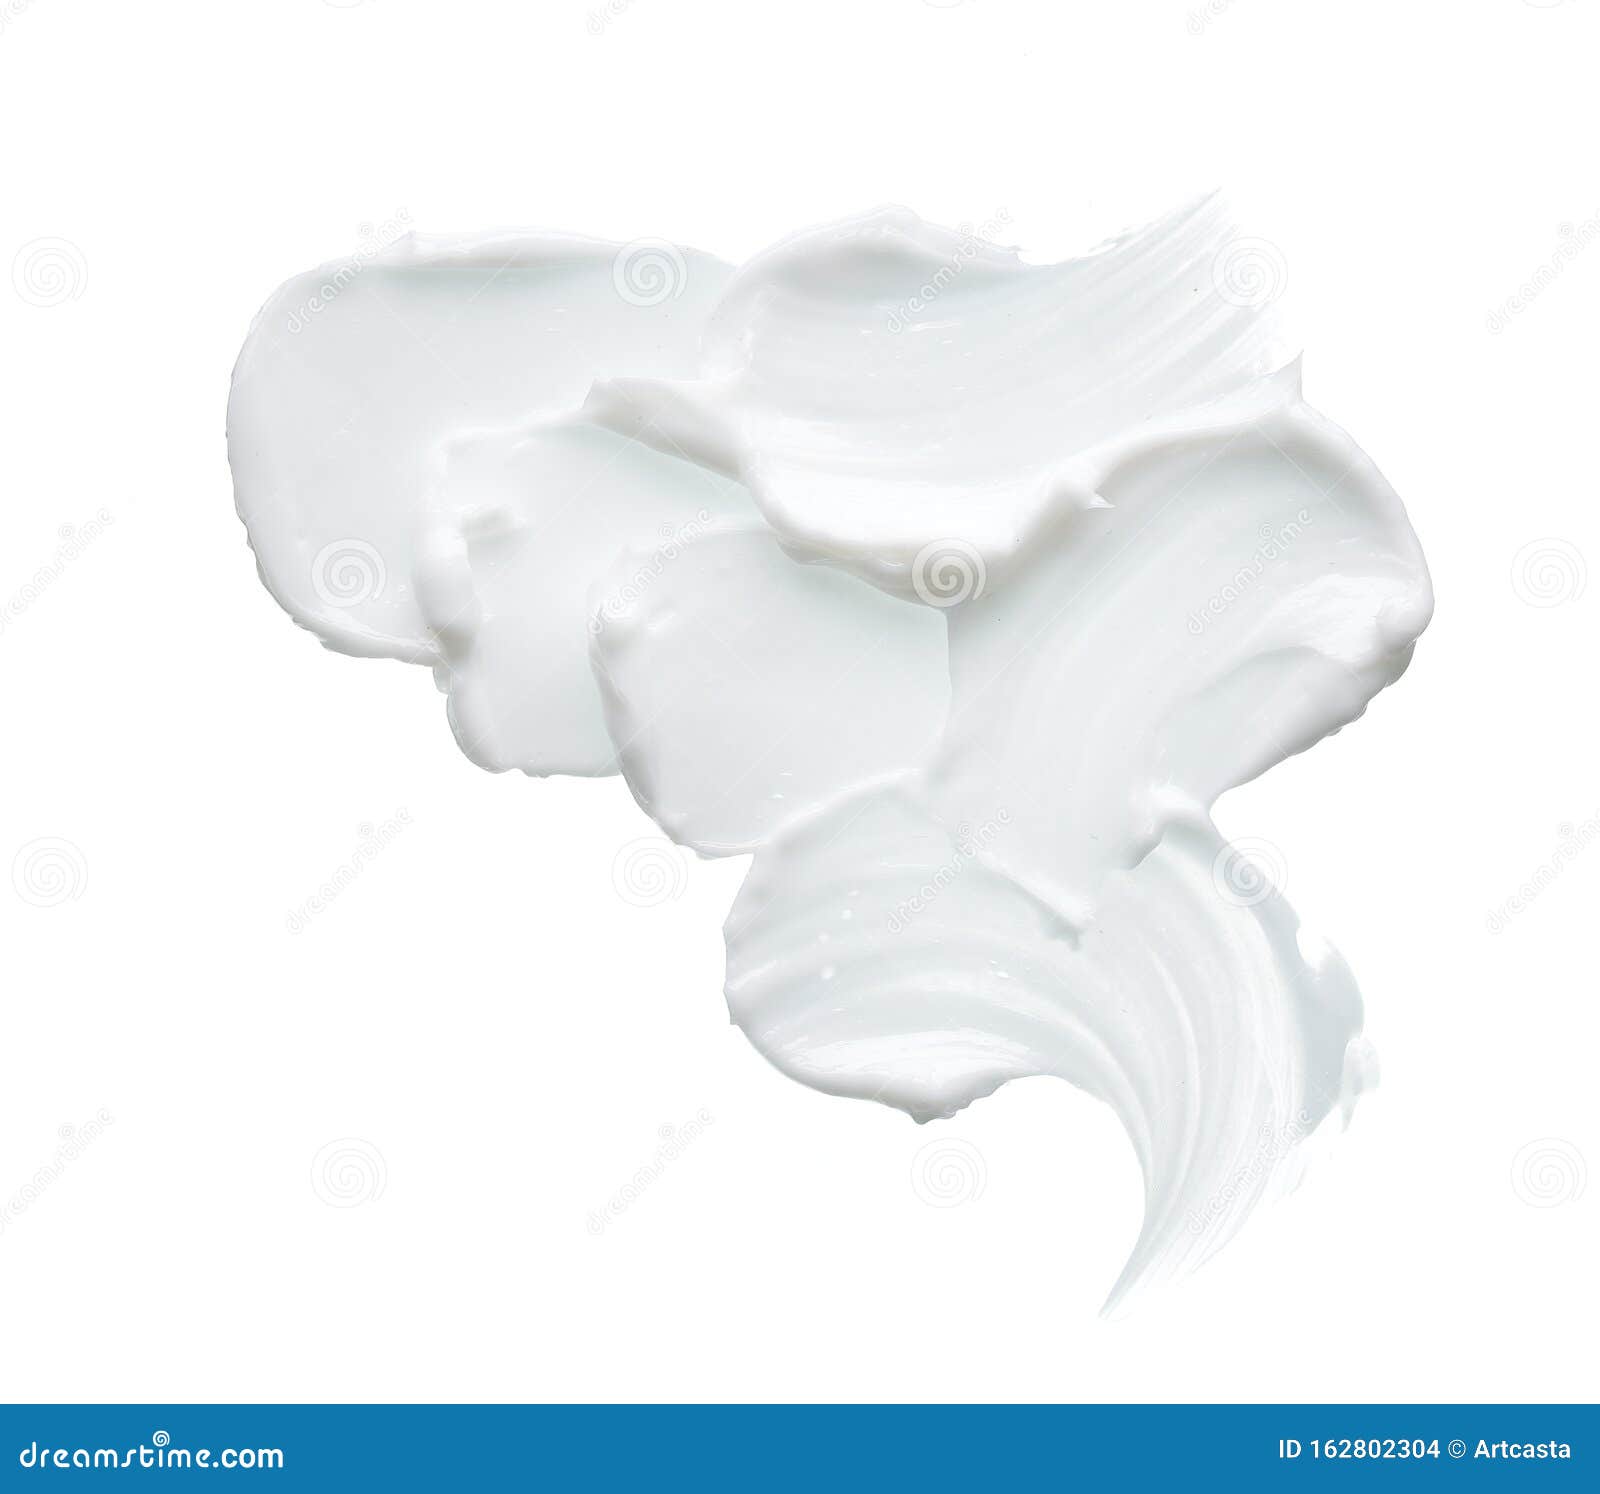 White texture and smear of face cream or white acrylic paint